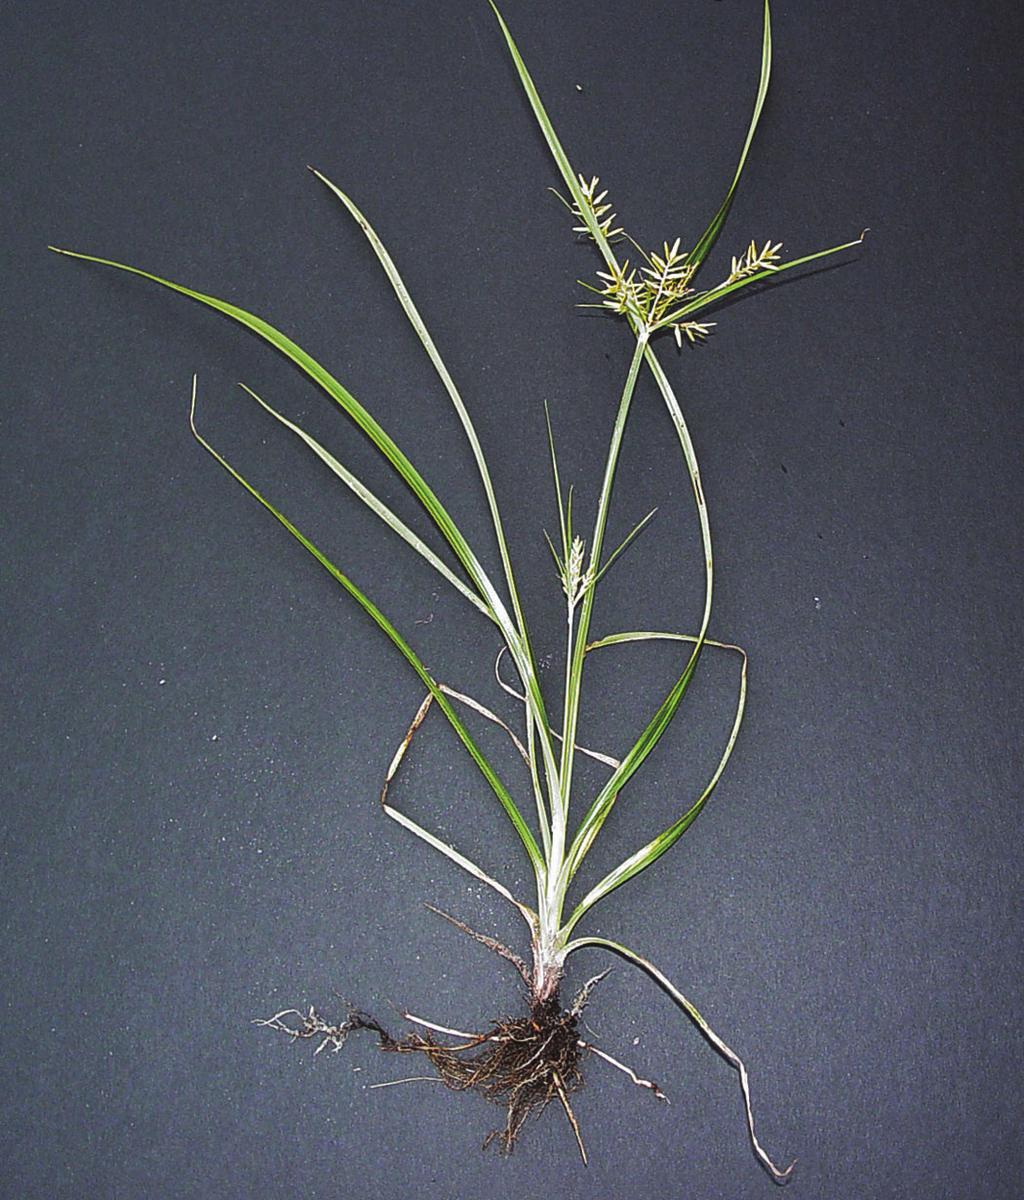 Comments: thrives in moist sandy soils but does not tolerate shade, often thought to be the world s worst weed Green Kyllinga Kyllinga brevifolia (Cyperus brevifolius) Figure 1.